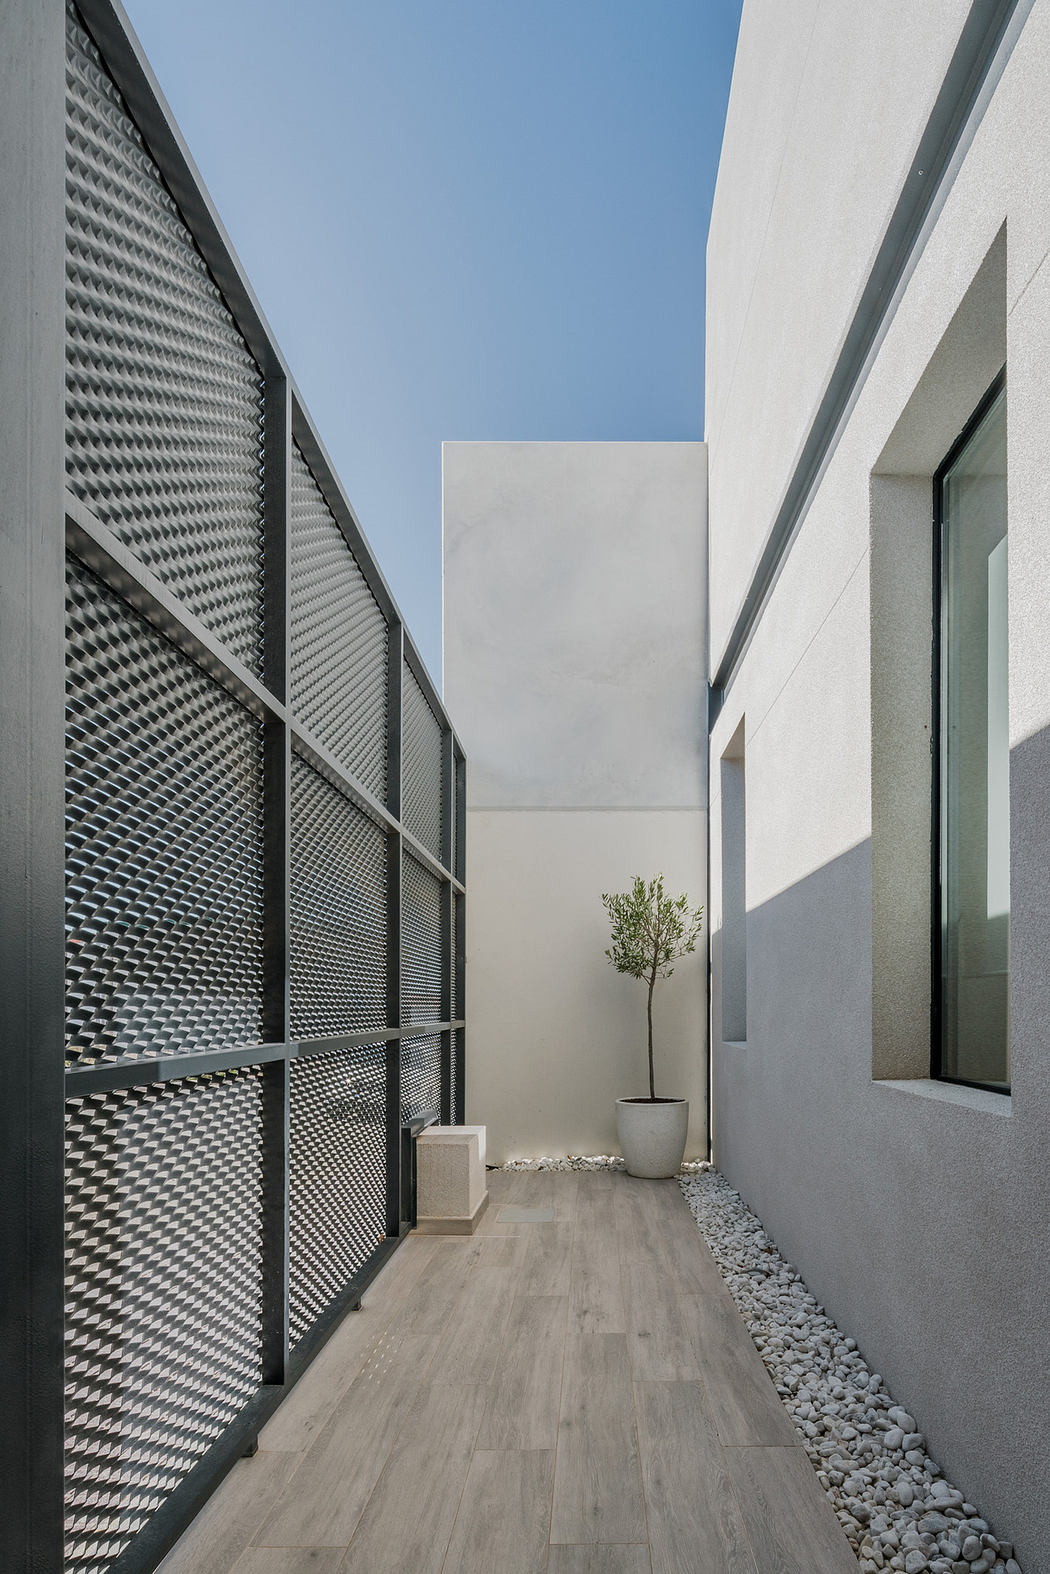 Modern exterior corridor with mesh paneling and minimalistic plant decor.